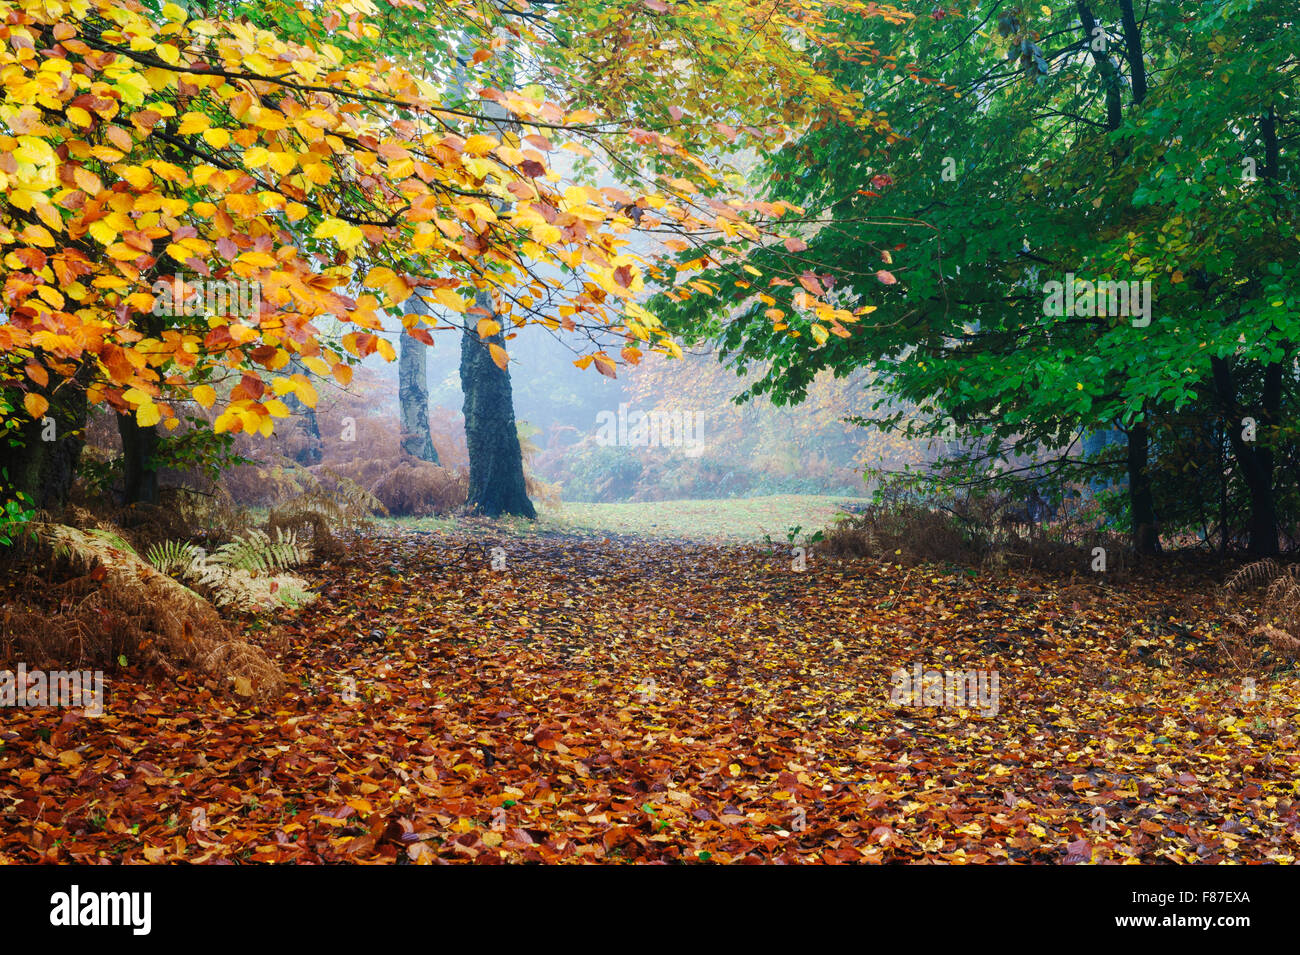 A misty autumn morning in an English woodland. Stock Photo